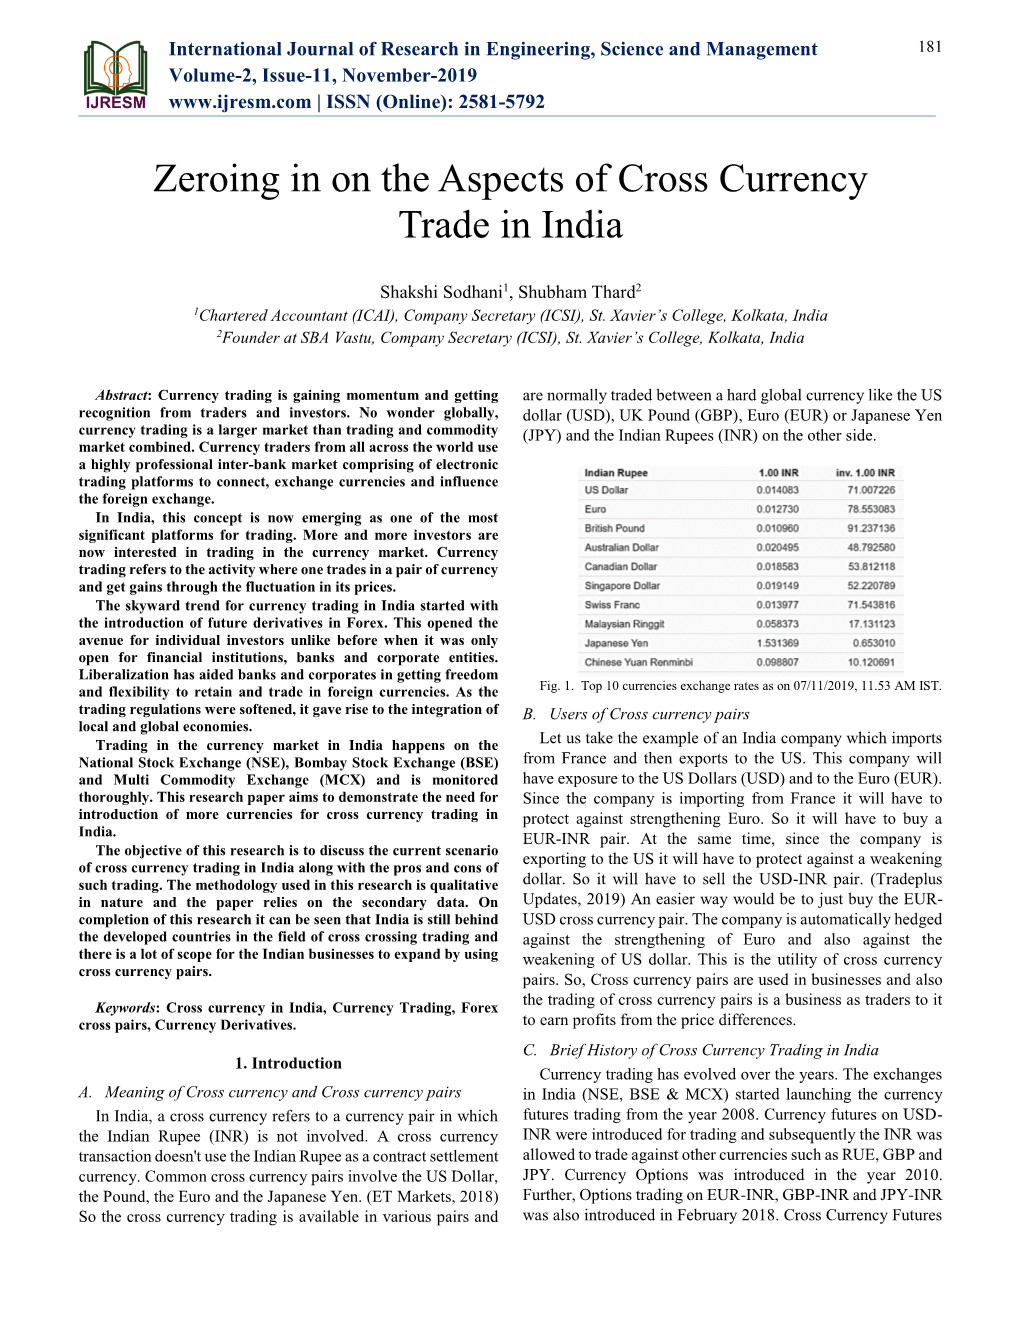 Zeroing in on the Aspects of Cross Currency Trade in India